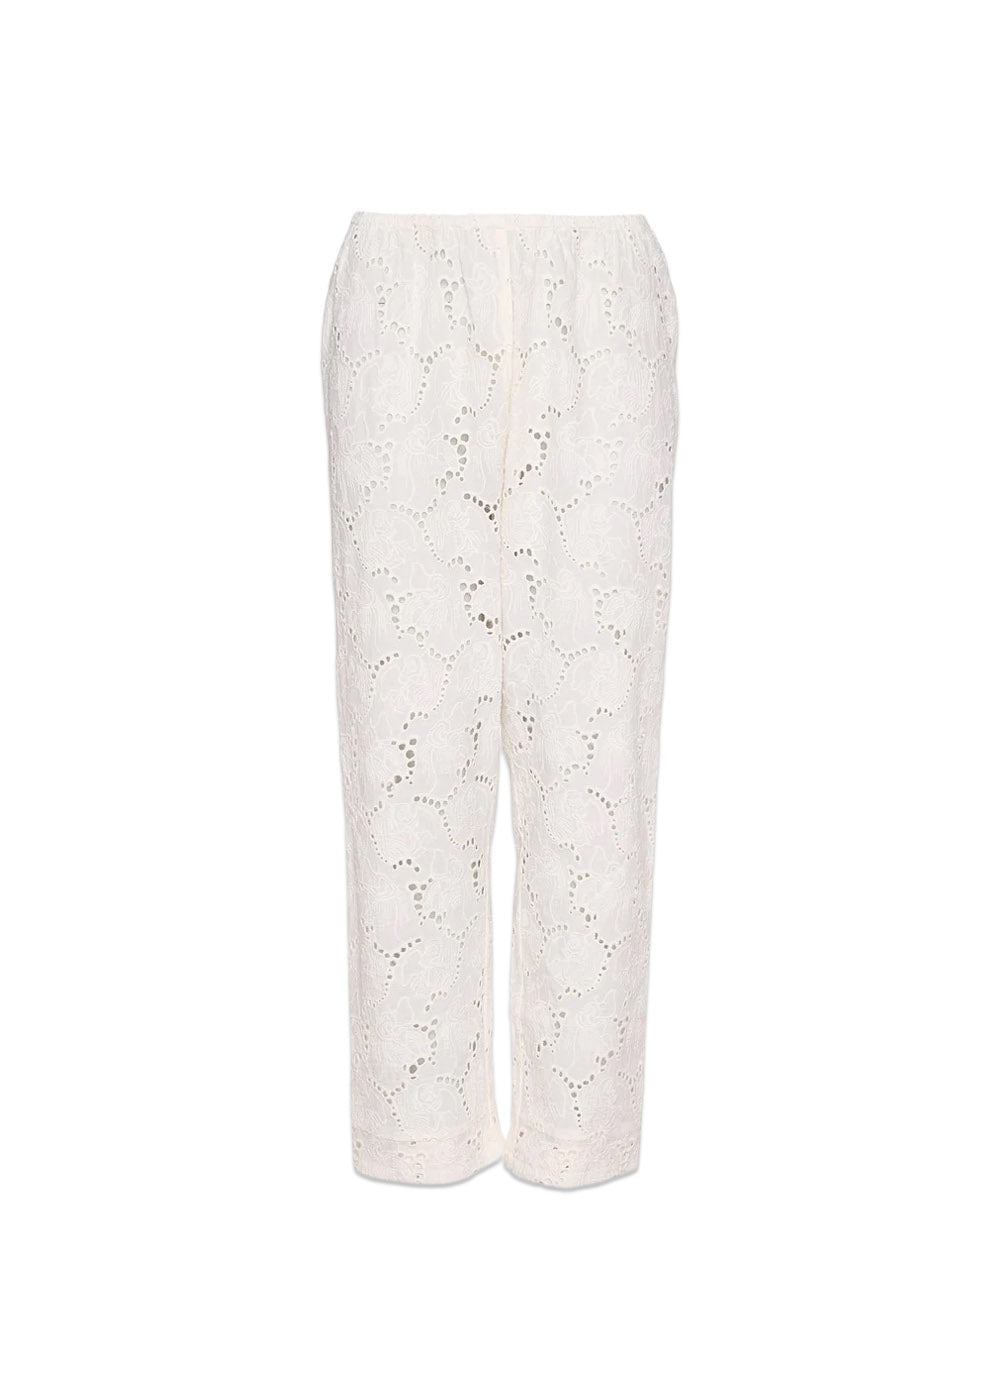 ASTA LEFTOVER BRODERIE ANGLAISE PANTS - White Swan